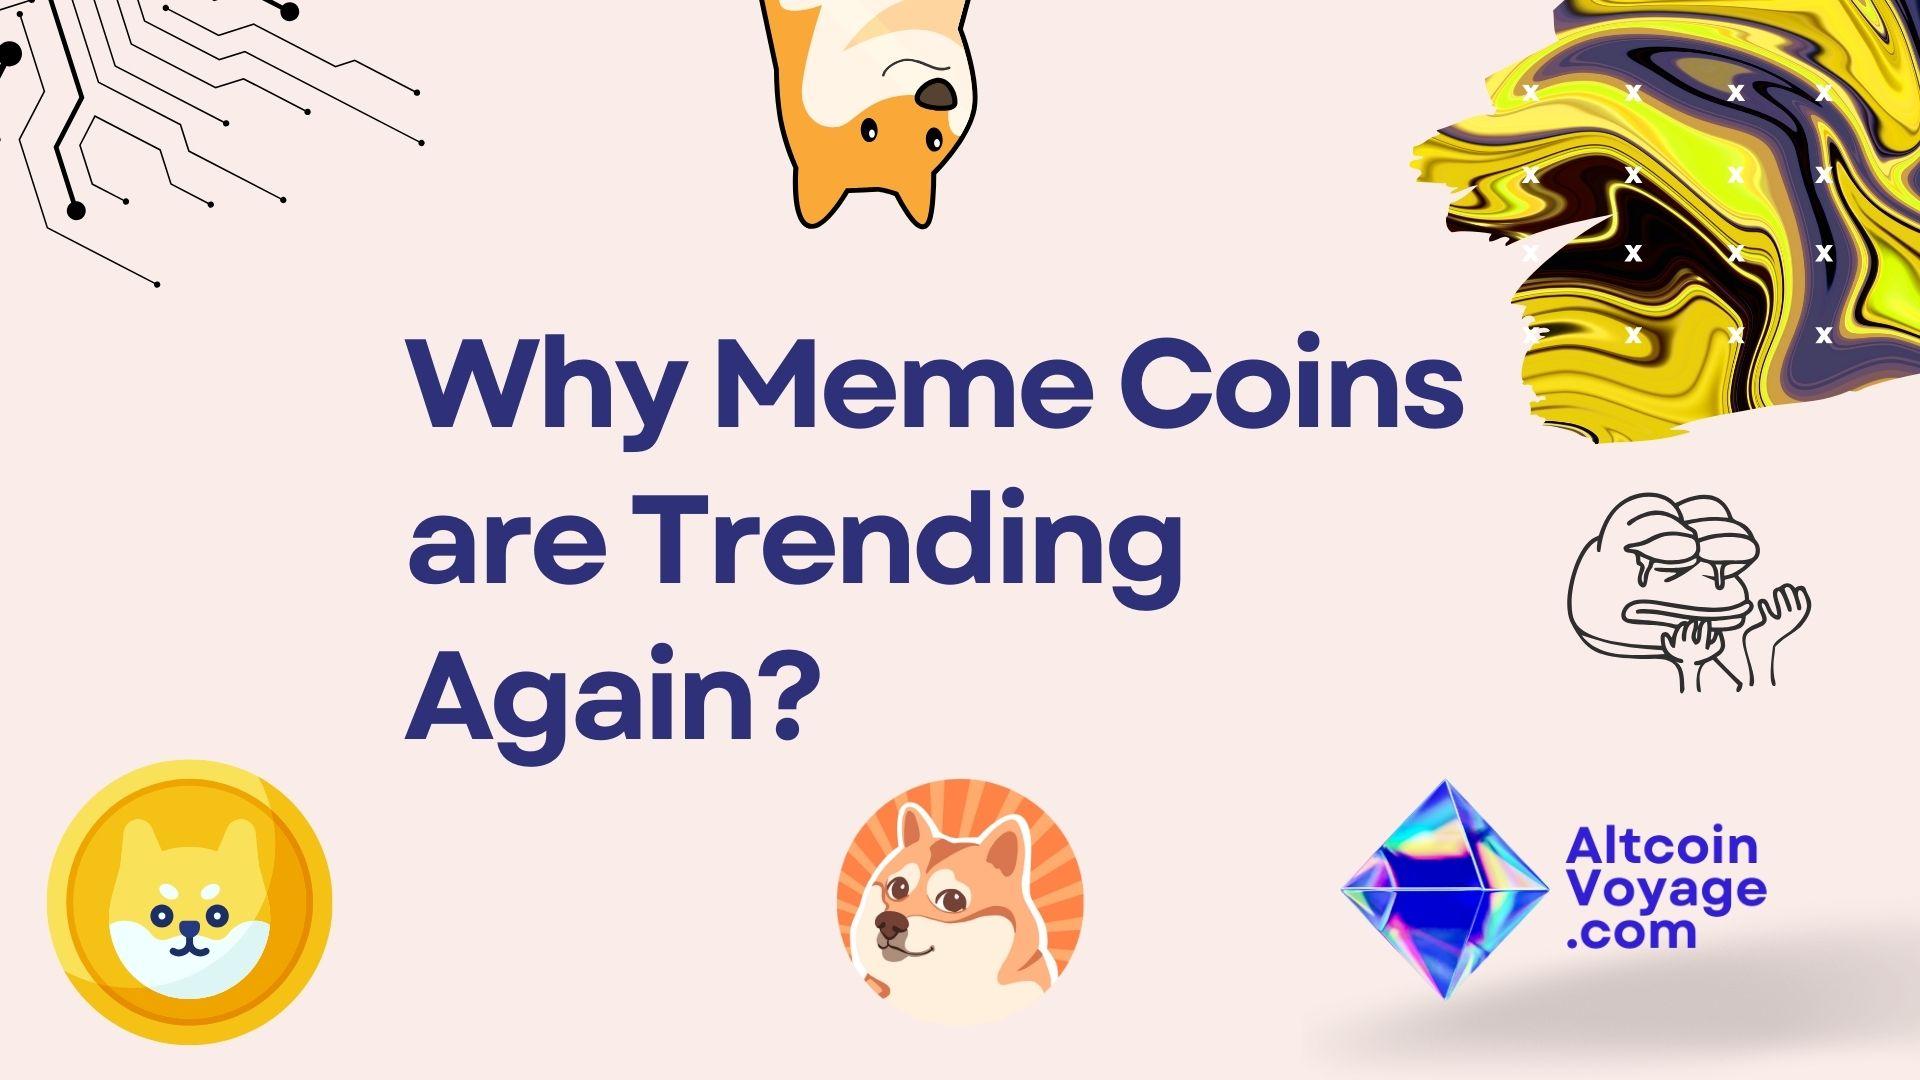 Why Meme Coins are Trending Again?